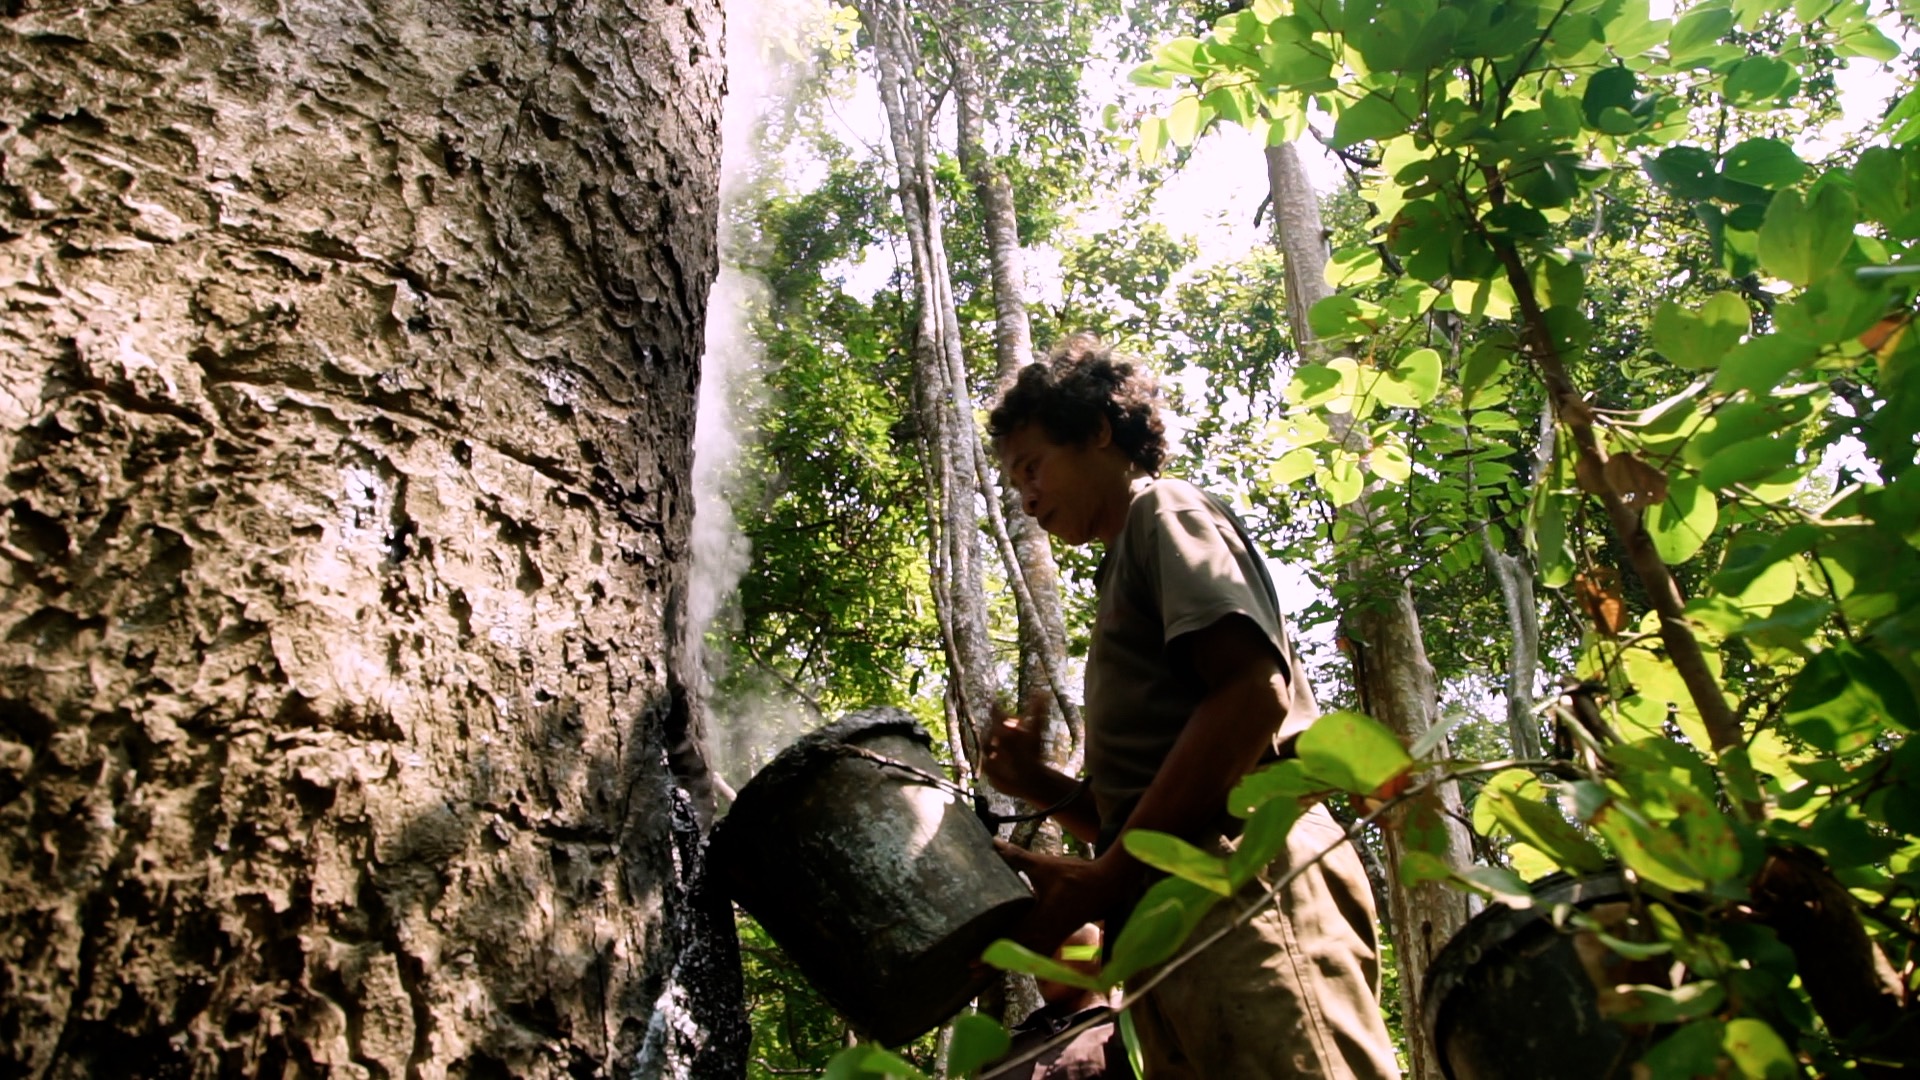 A resident of Prey Lang Wildlife Sanctuary taps a resin tree in 2015. The Indigenous communities that call Prey Lang home have been sustainable tapping resin trees for generations, but these trees are targeted by illegal loggers on account of the tree's height, width and lack of branches that make the species ideal for turning into plywood. Image by Thomas Cristofoletti.